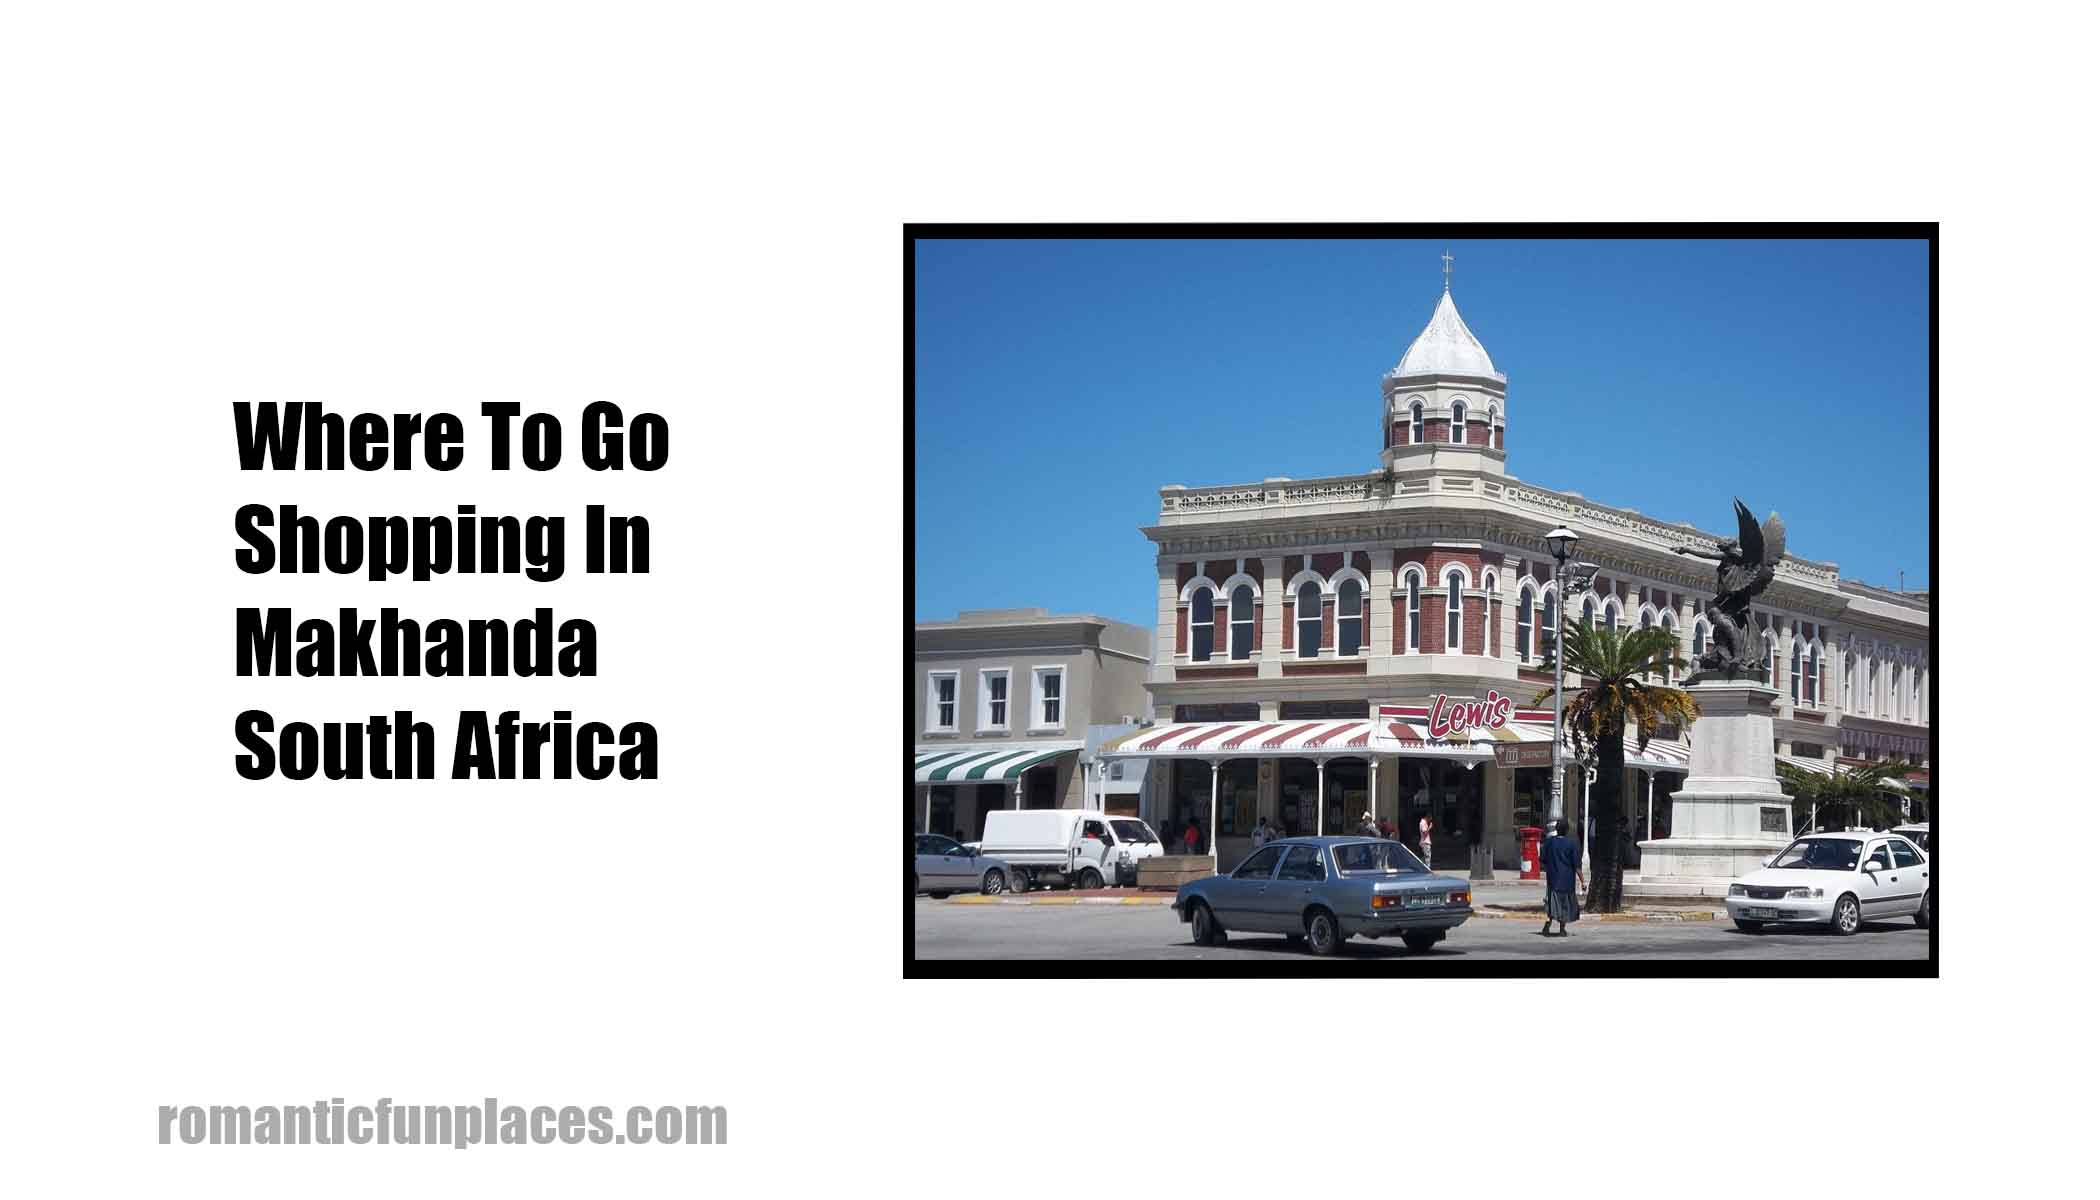 Where To Go Shopping In Makhanda South Africa